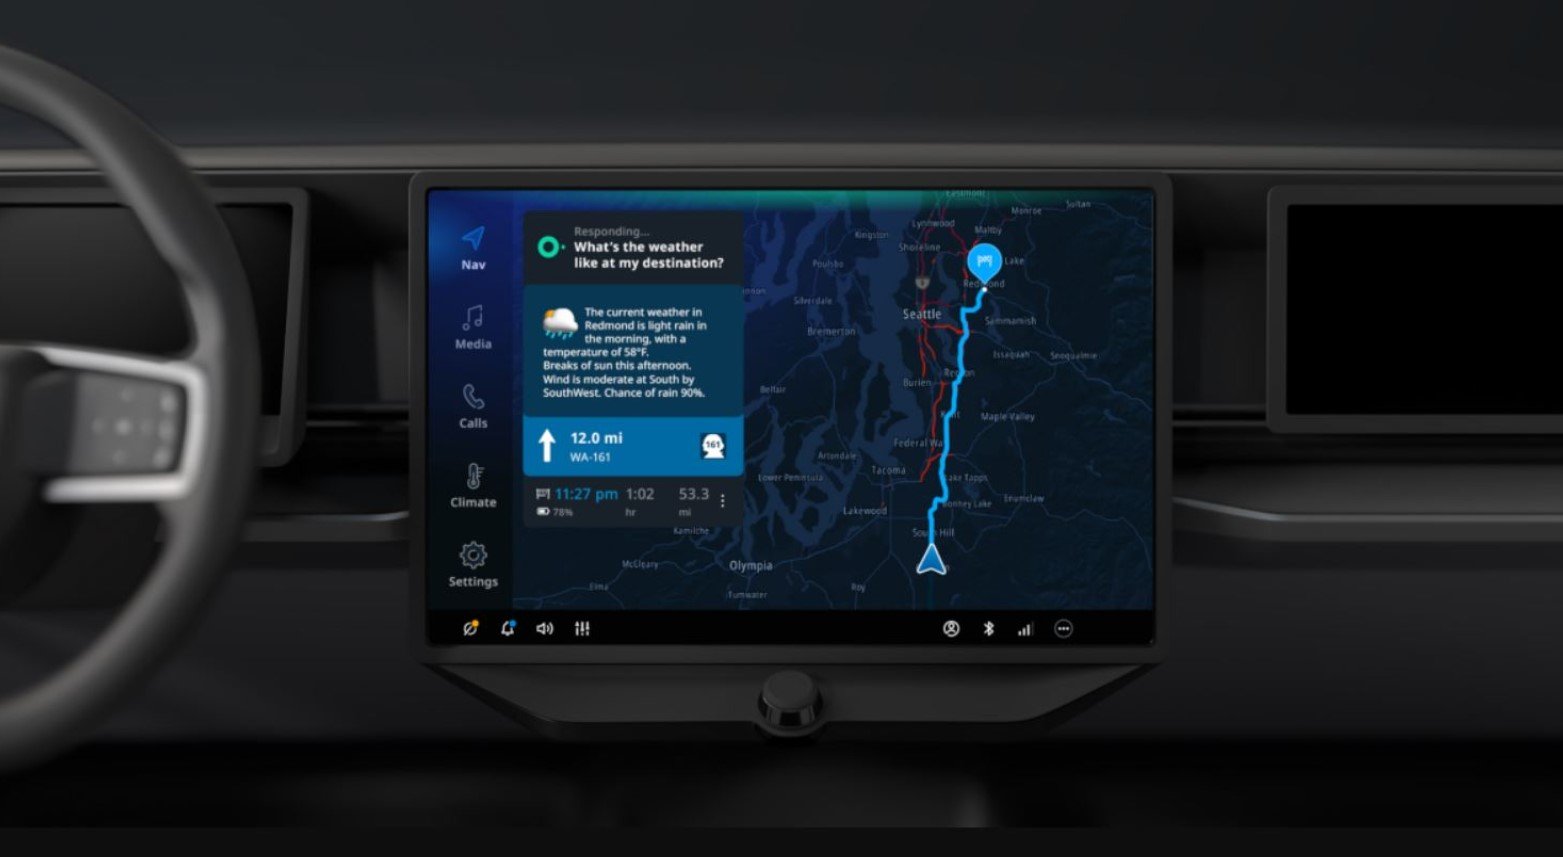 tomtom-and-microsoft-team-up-to-bring-ai-powered-voice-assistant-to-cars